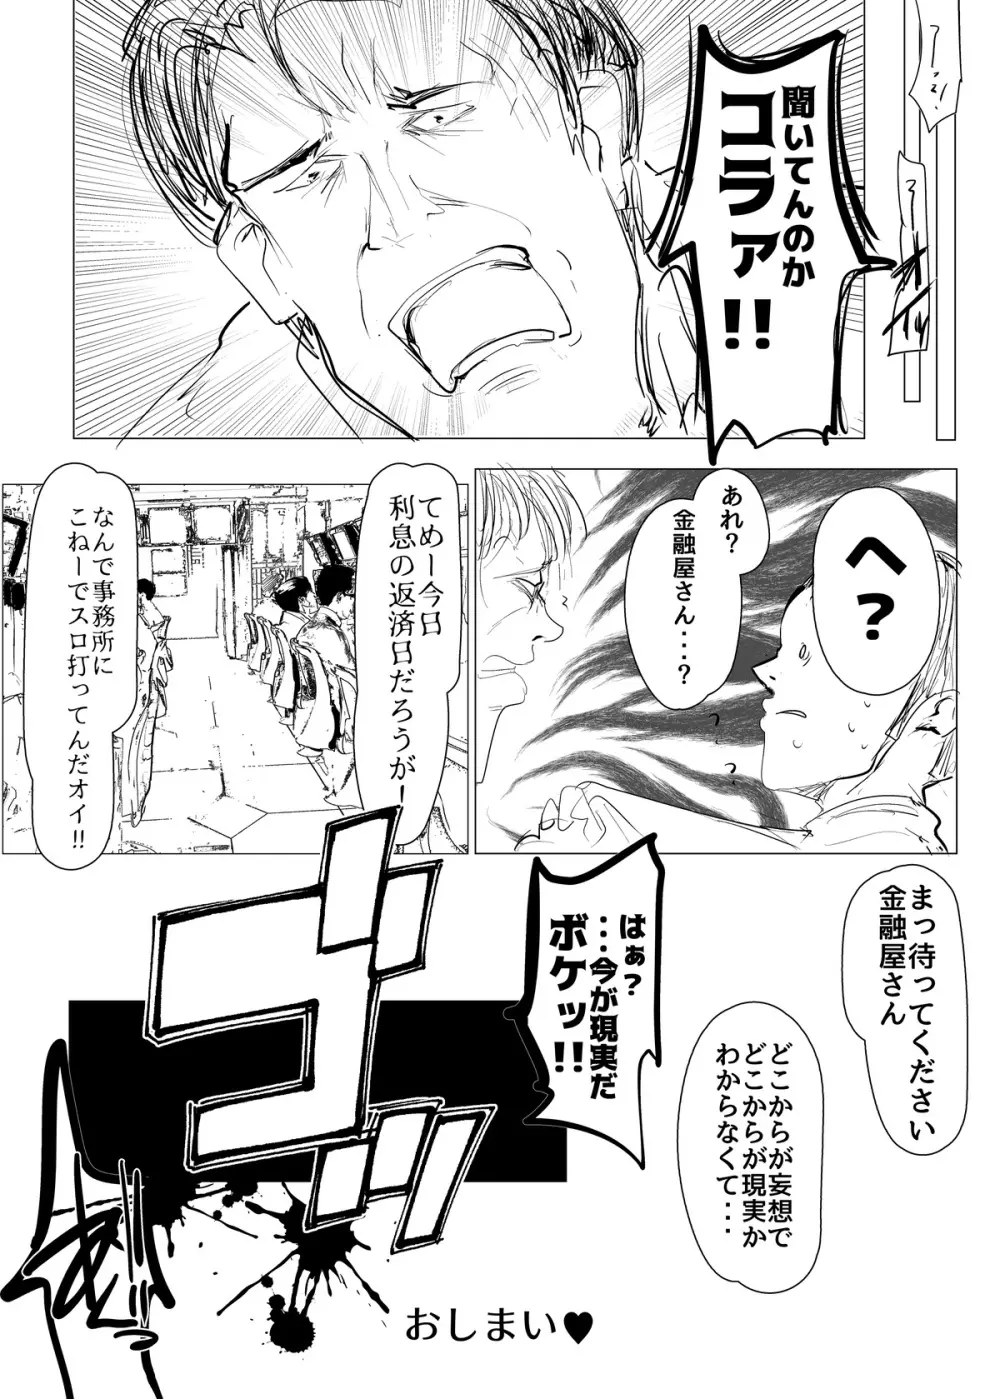 Re:ゼロから始めるパチスロ生活 - page15